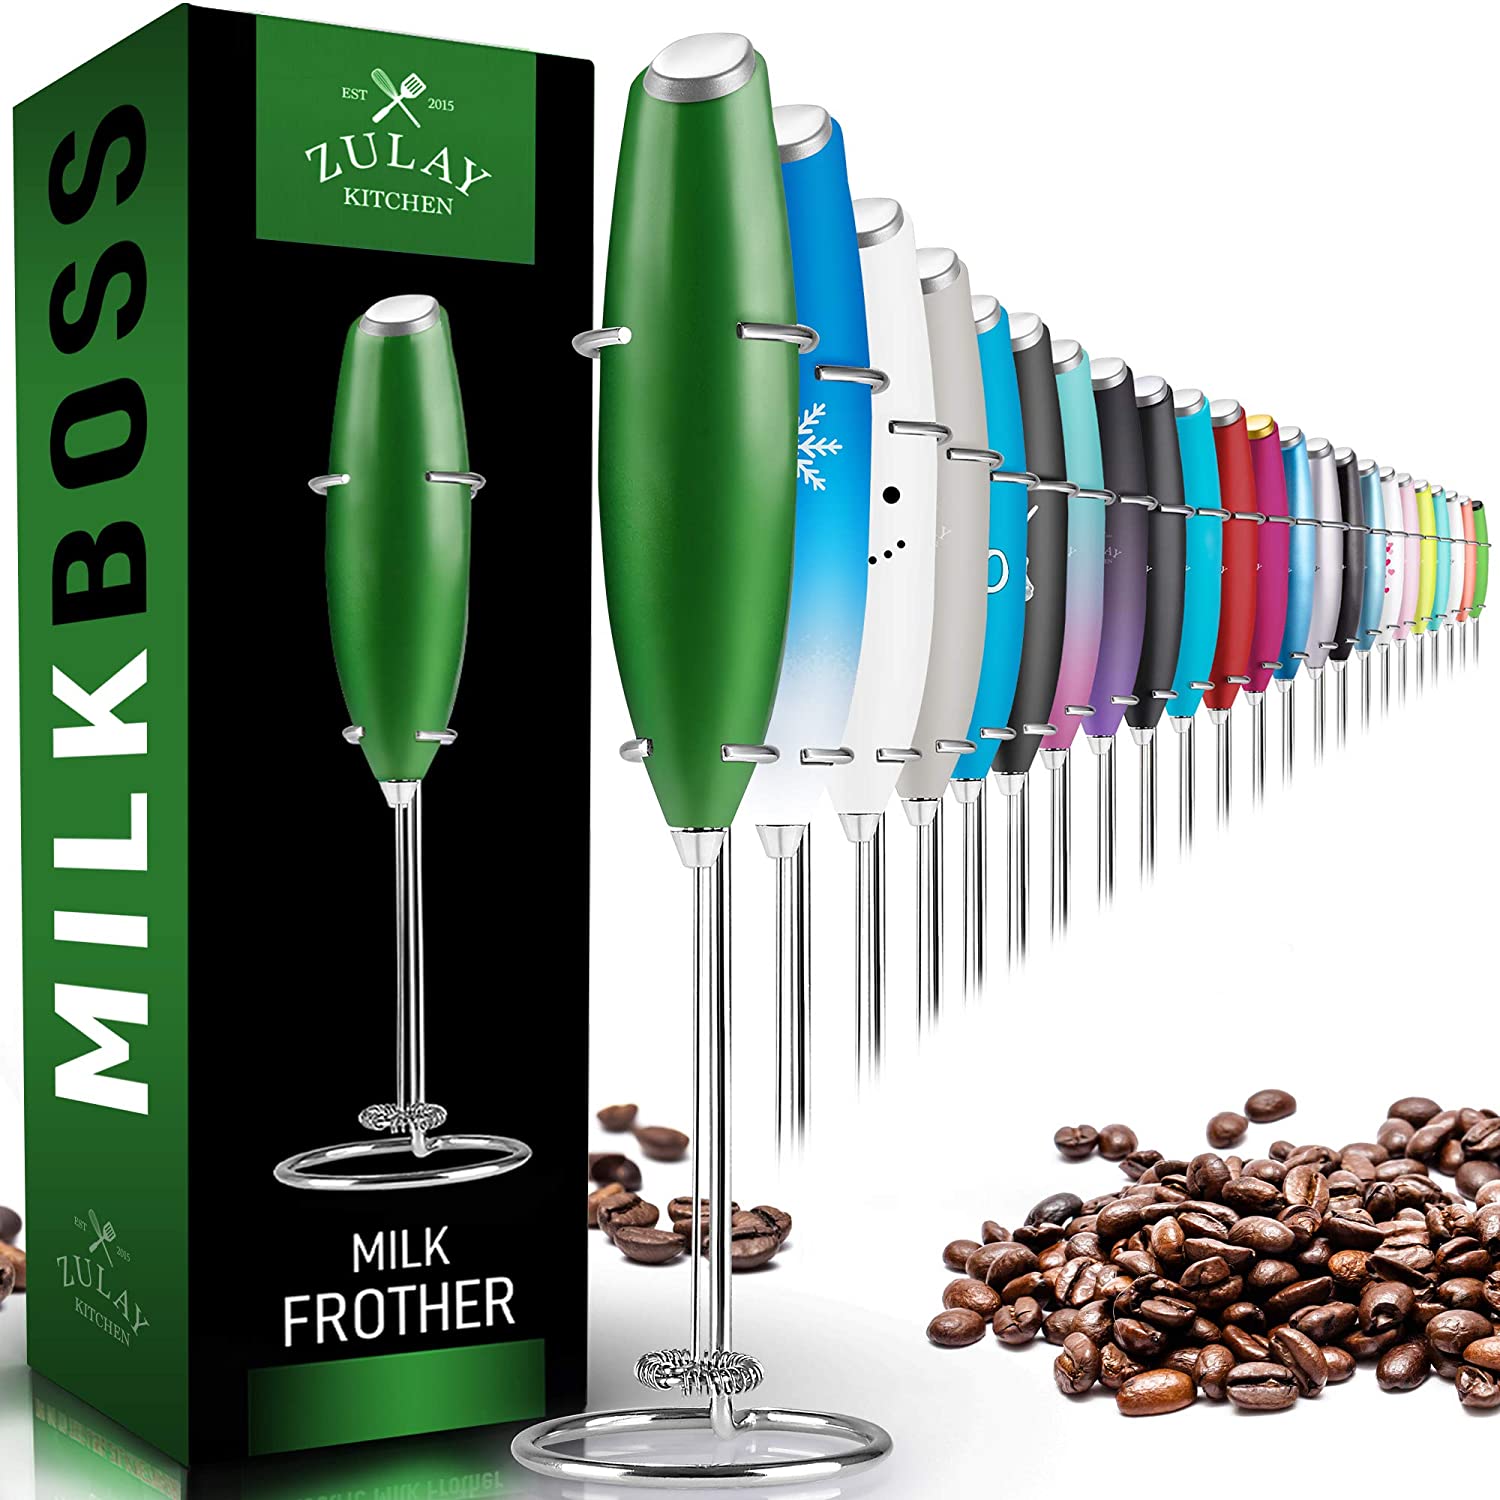 Milk Boss Milk Frother With Stand - Zulay KitchenZulay Kitchen